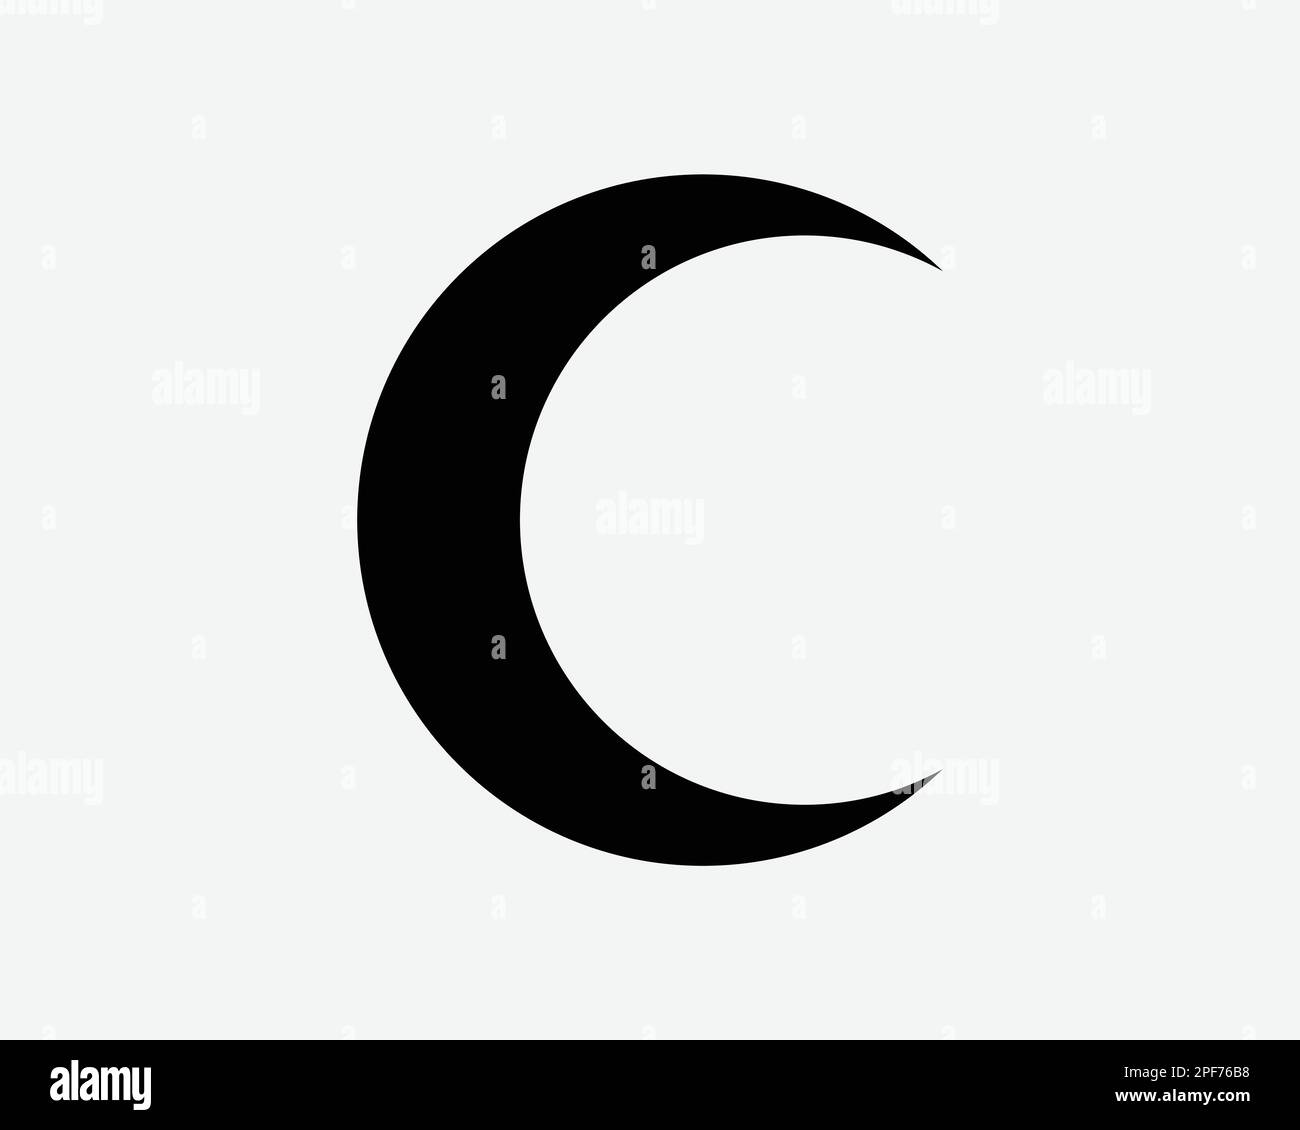 Crescent Symbol Lunar Moon Shape Islam Islamic Muslim Emblem First Aid Black and White Sign Icon Vector Graphic Clipart Illustration Artwork Pictogram Stock Vector